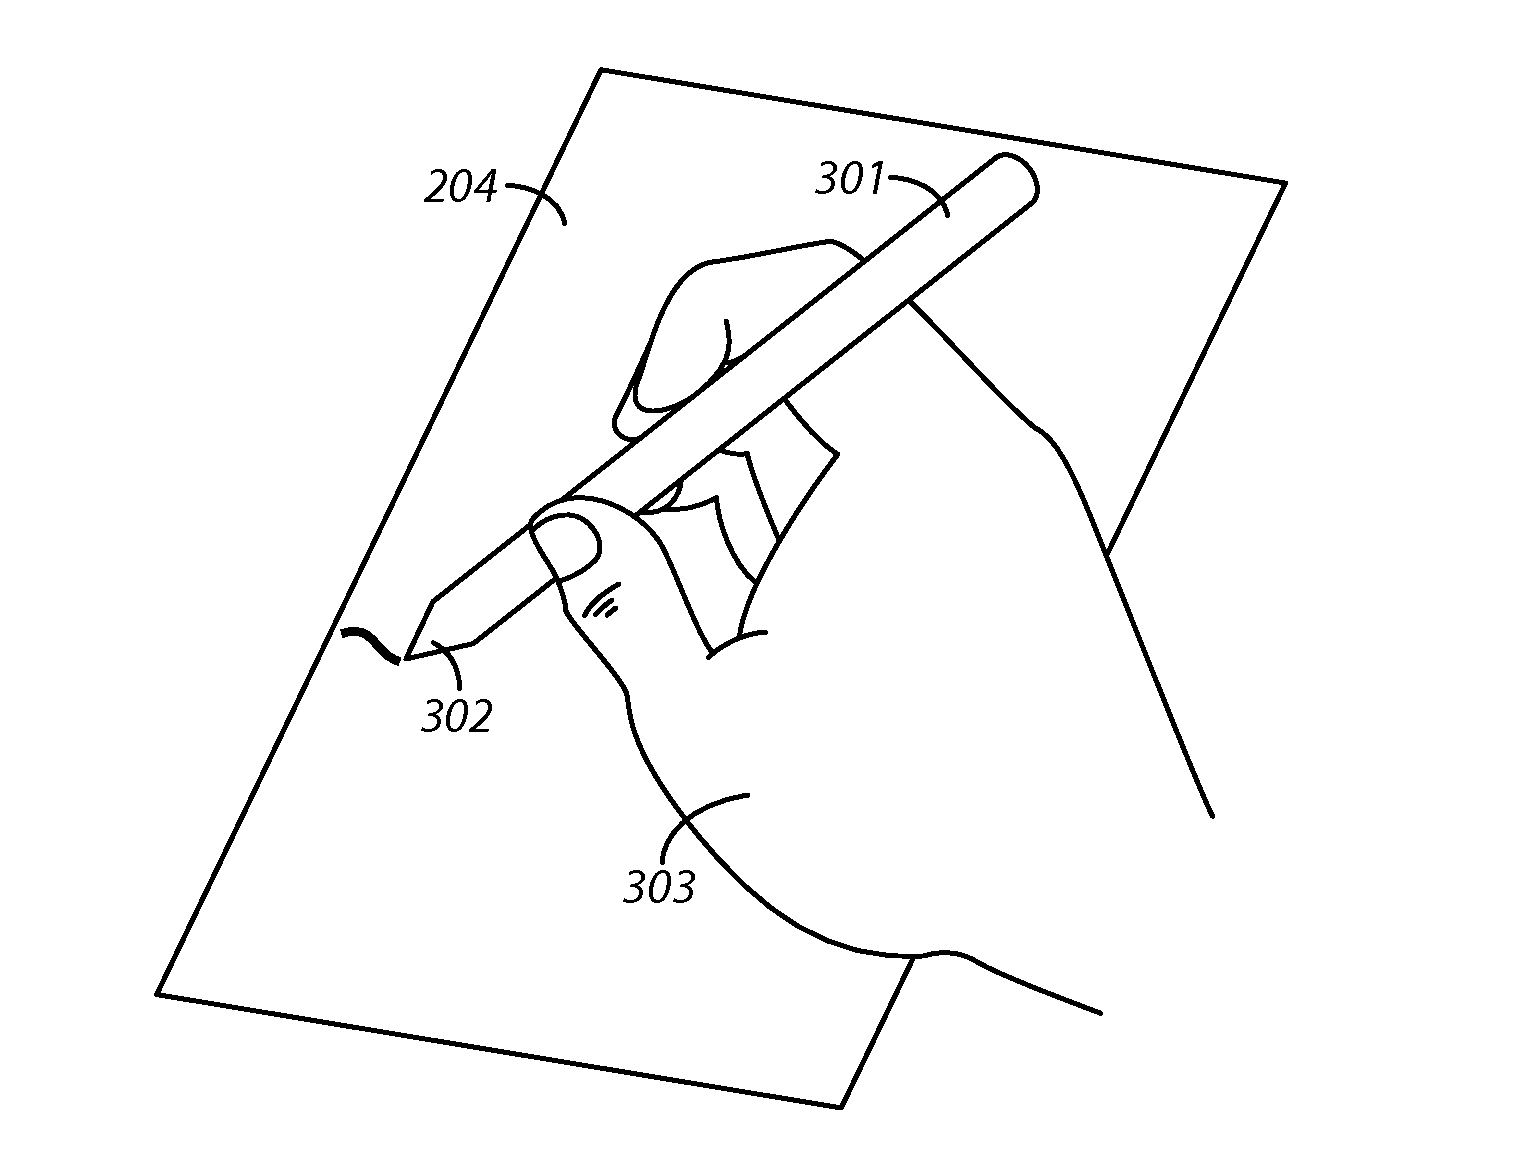 Method and apparatus pertaining to predicting movement of a stylus